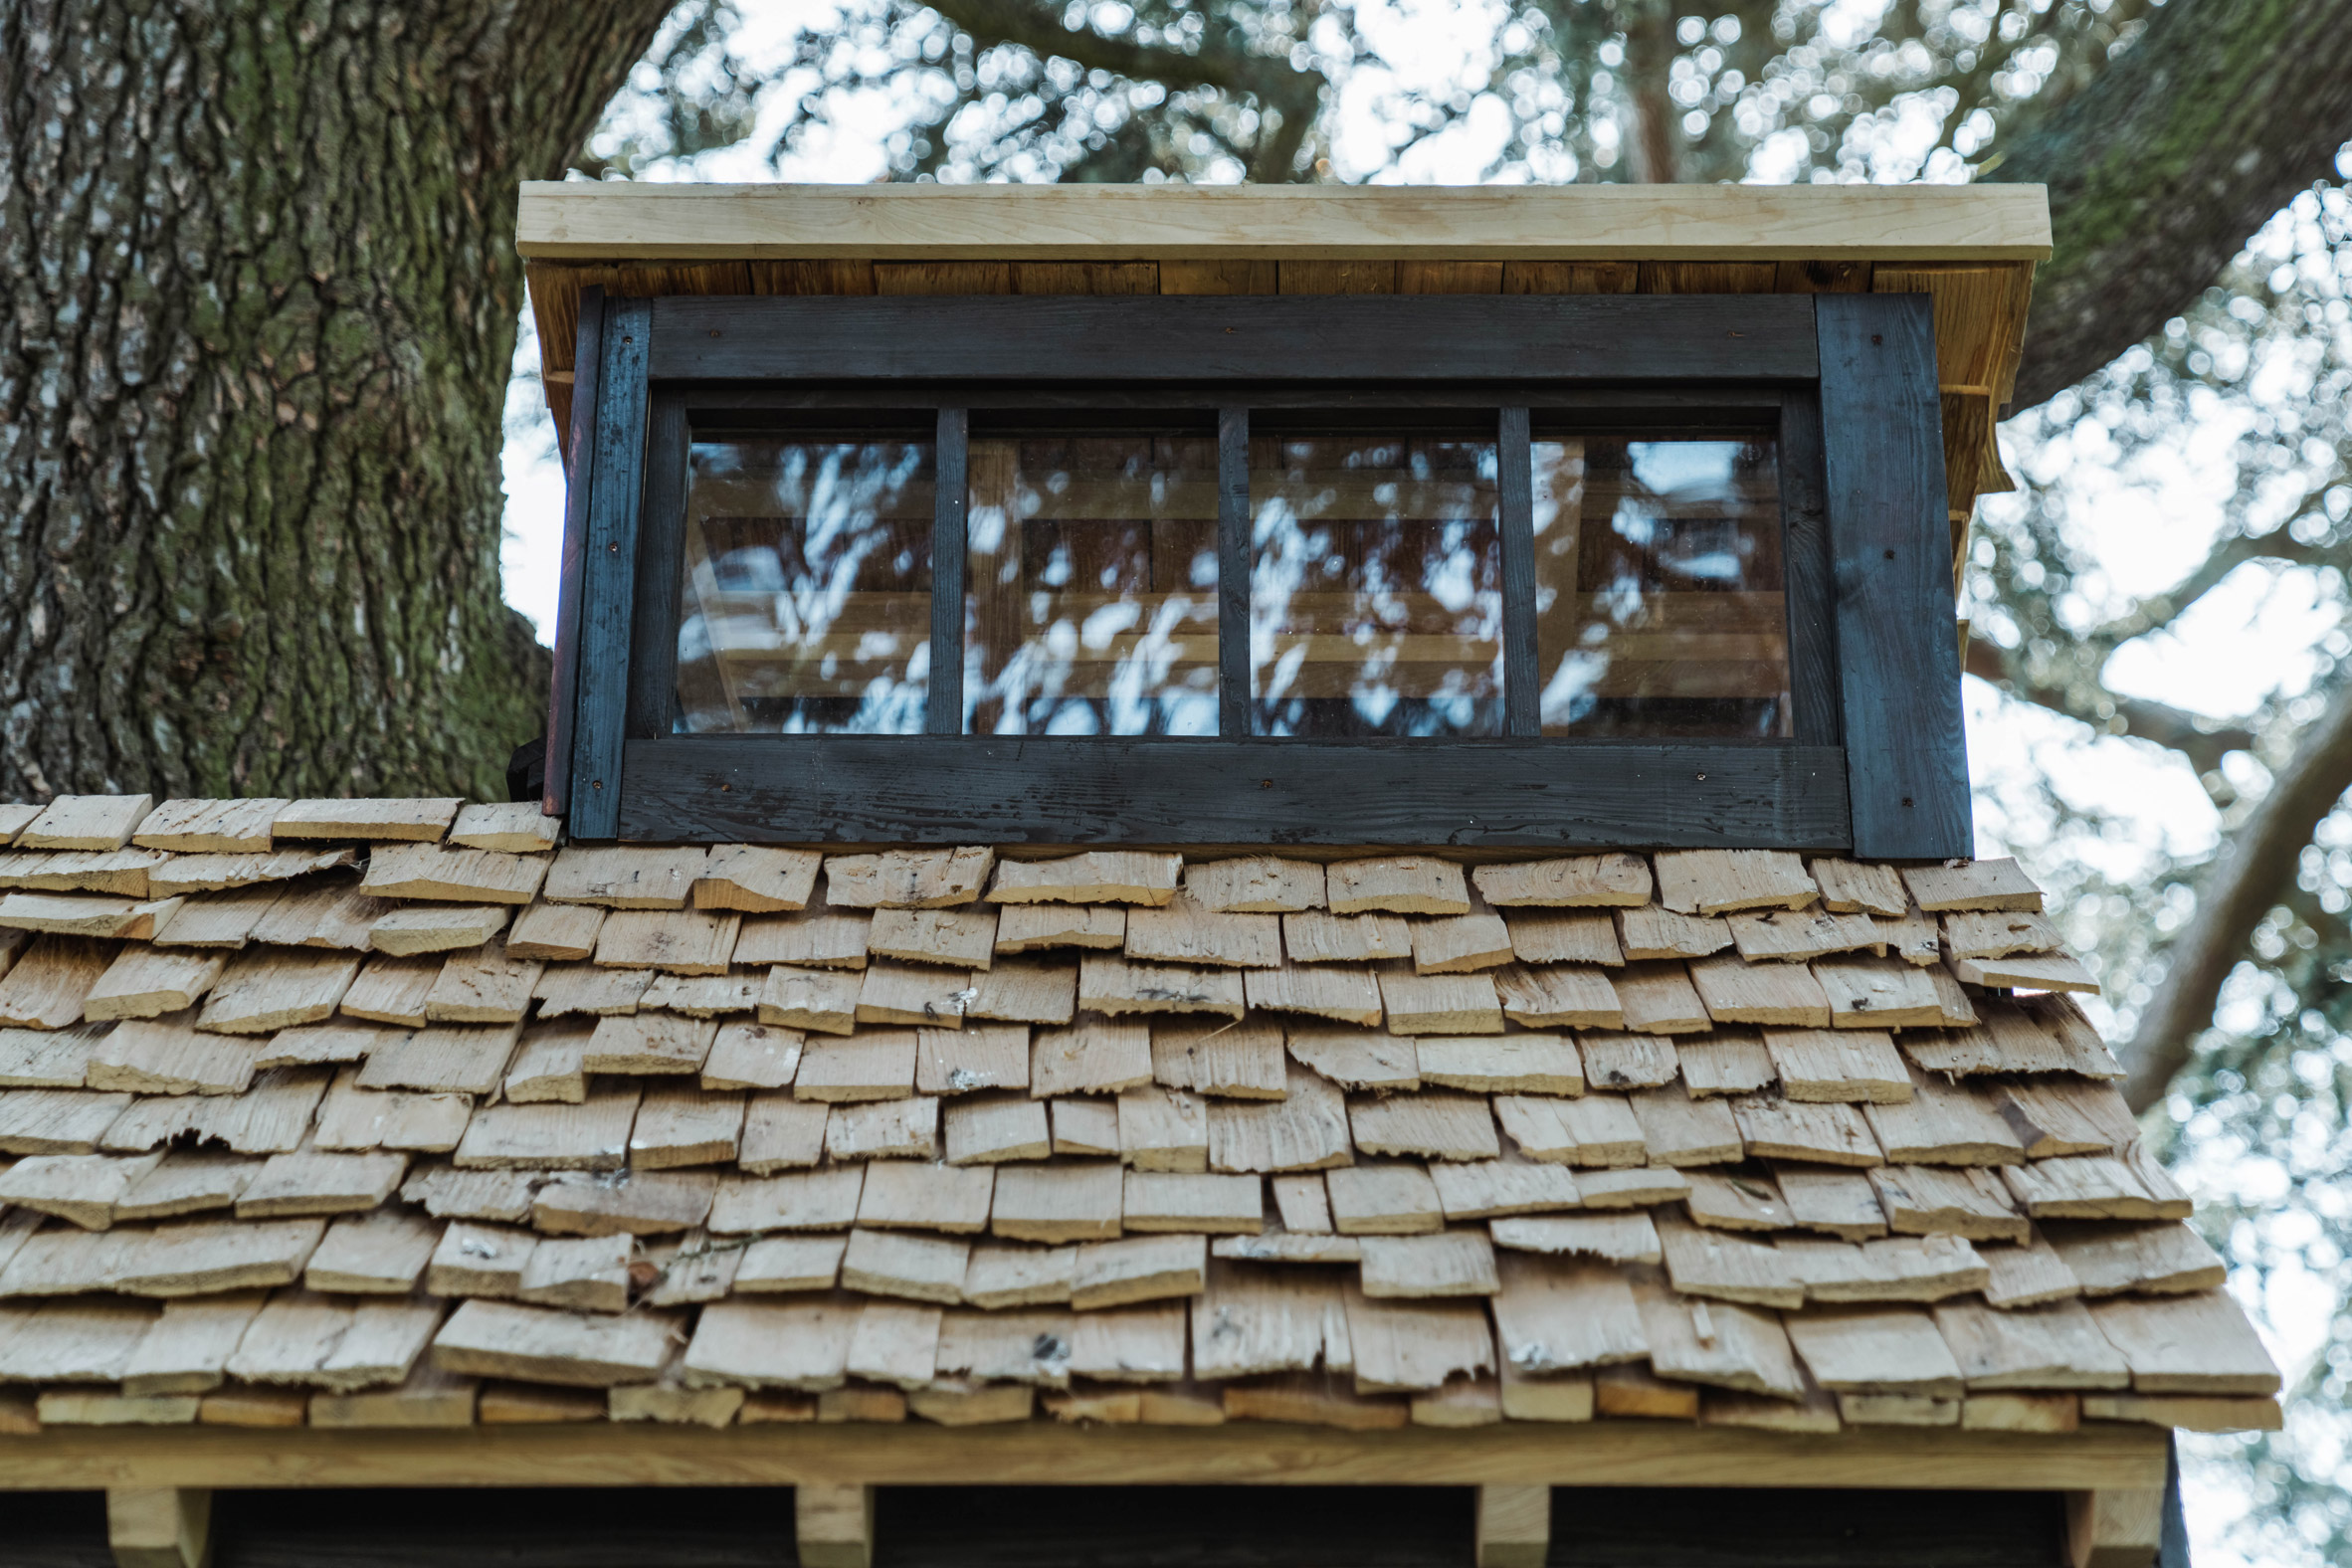 Roof shingles made of cleft wood shakes